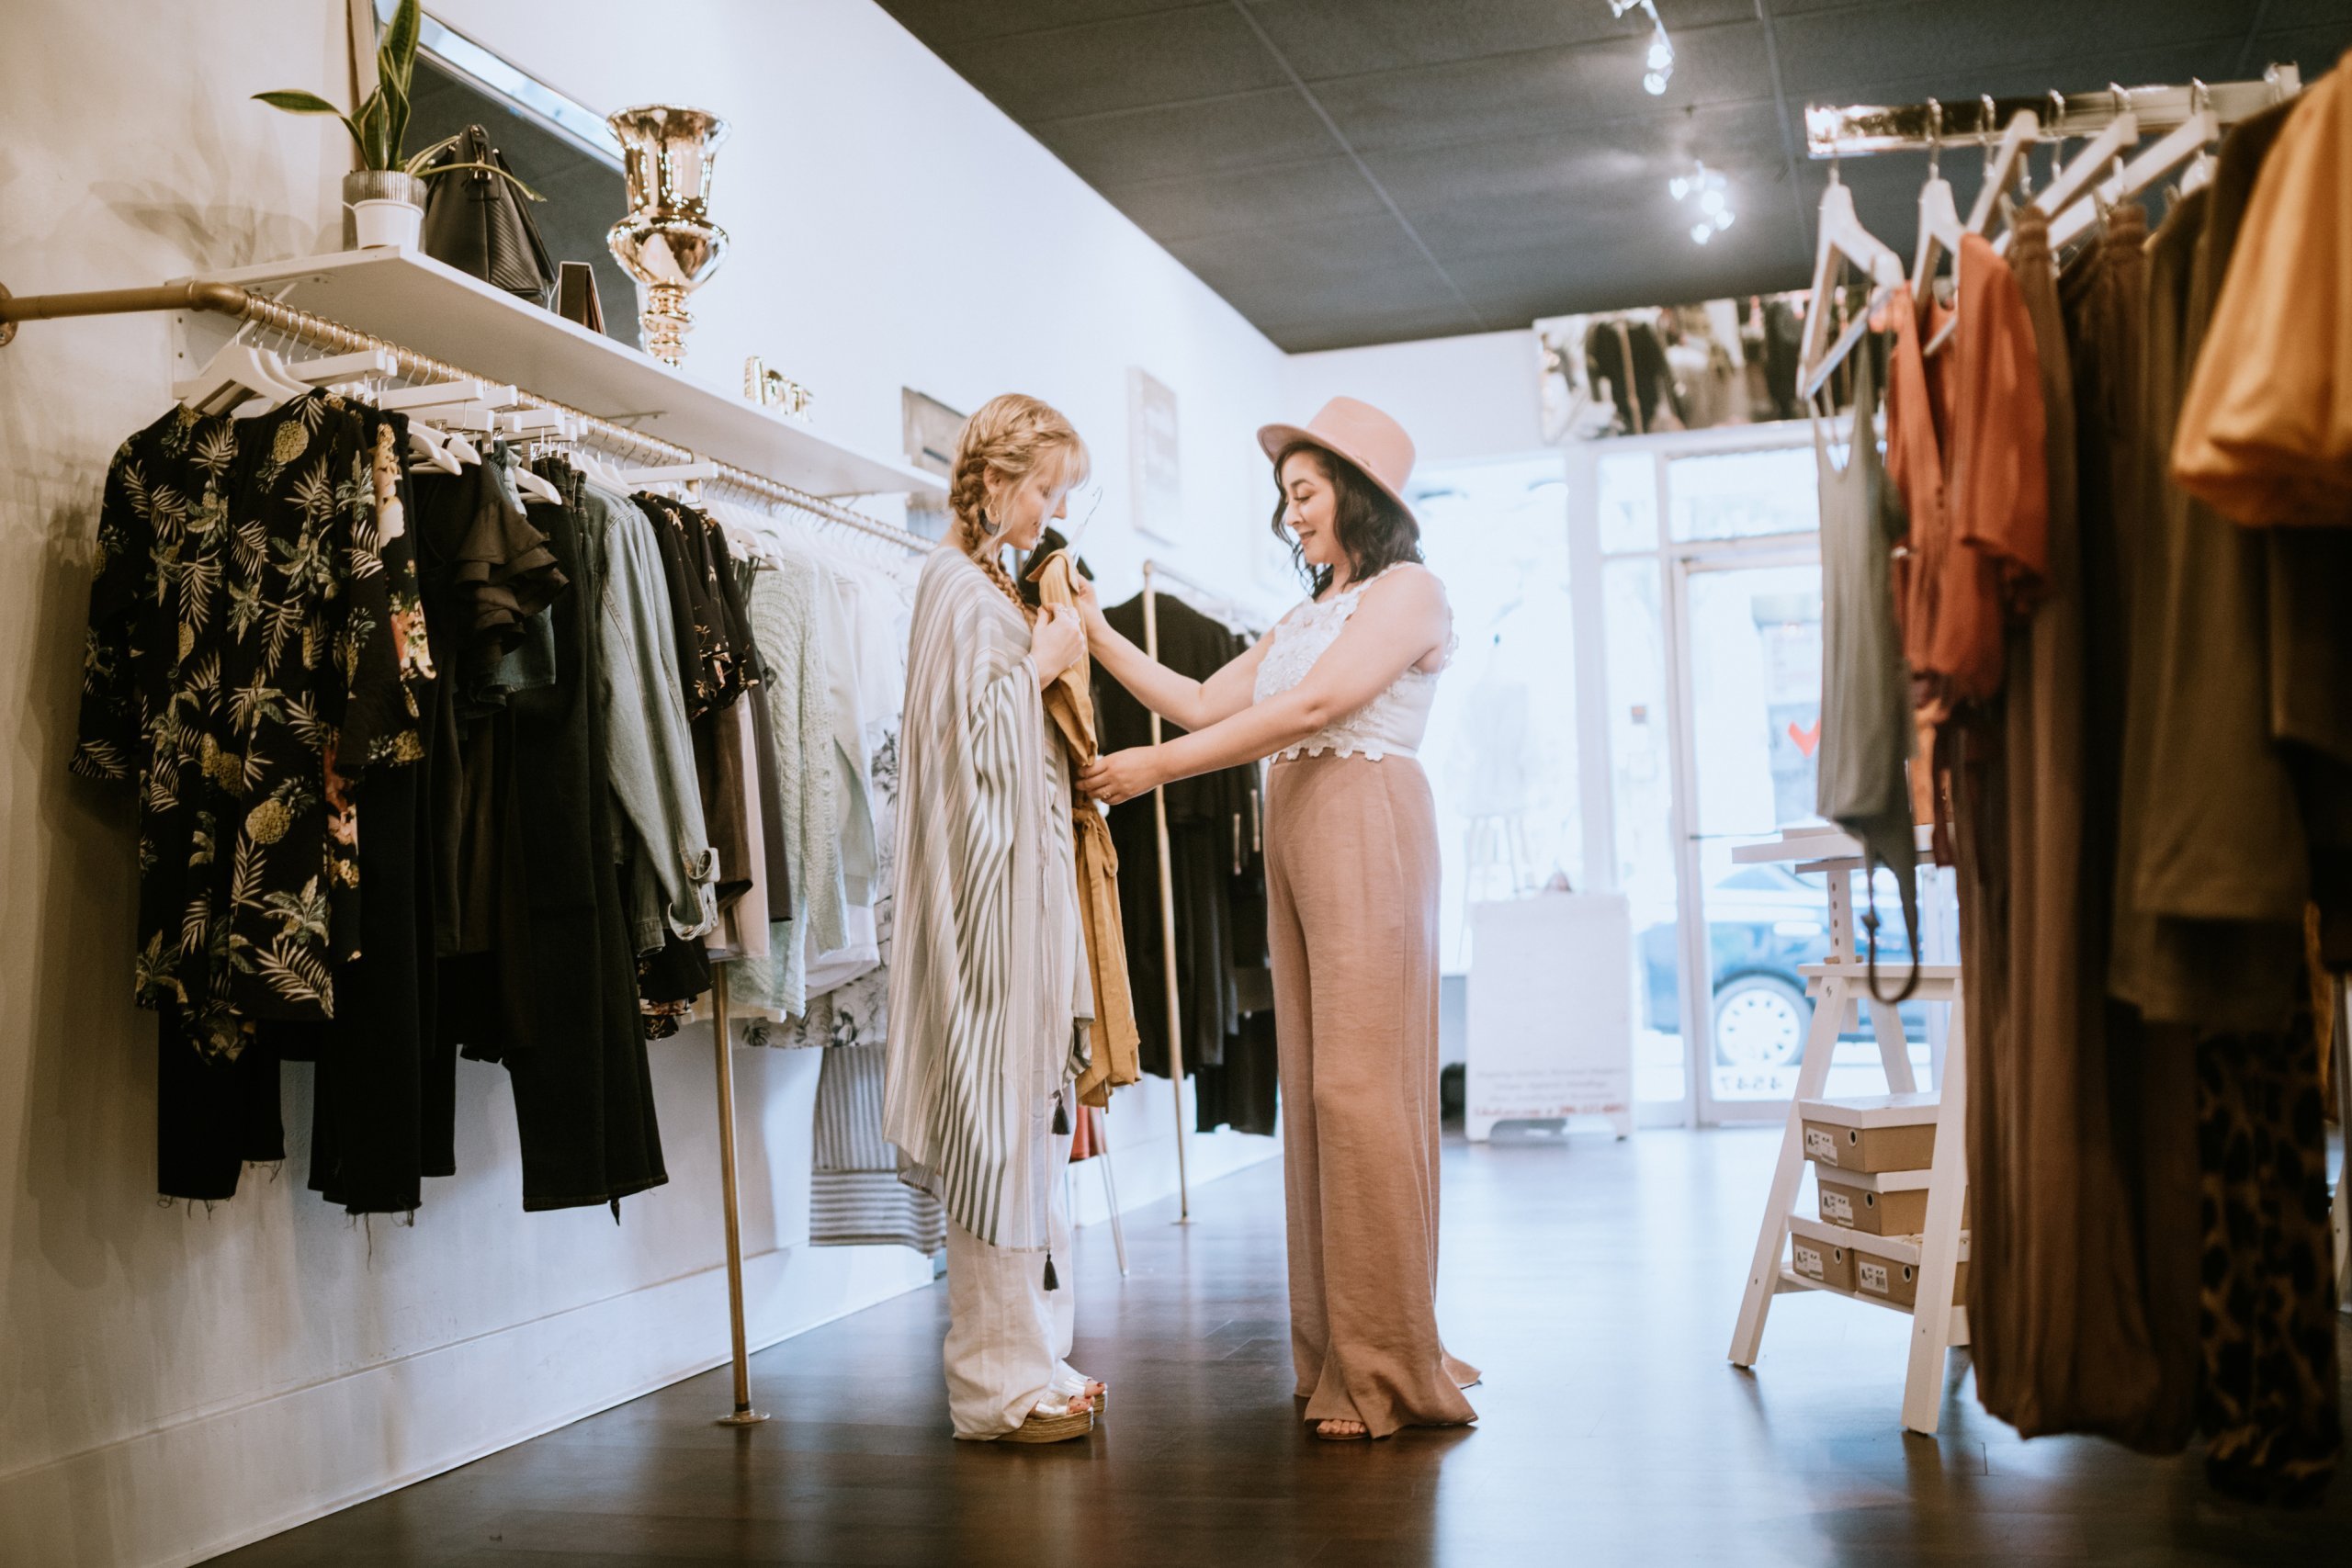 Love Fashion and Shopping? Here's How to Turn Your Passion Into a